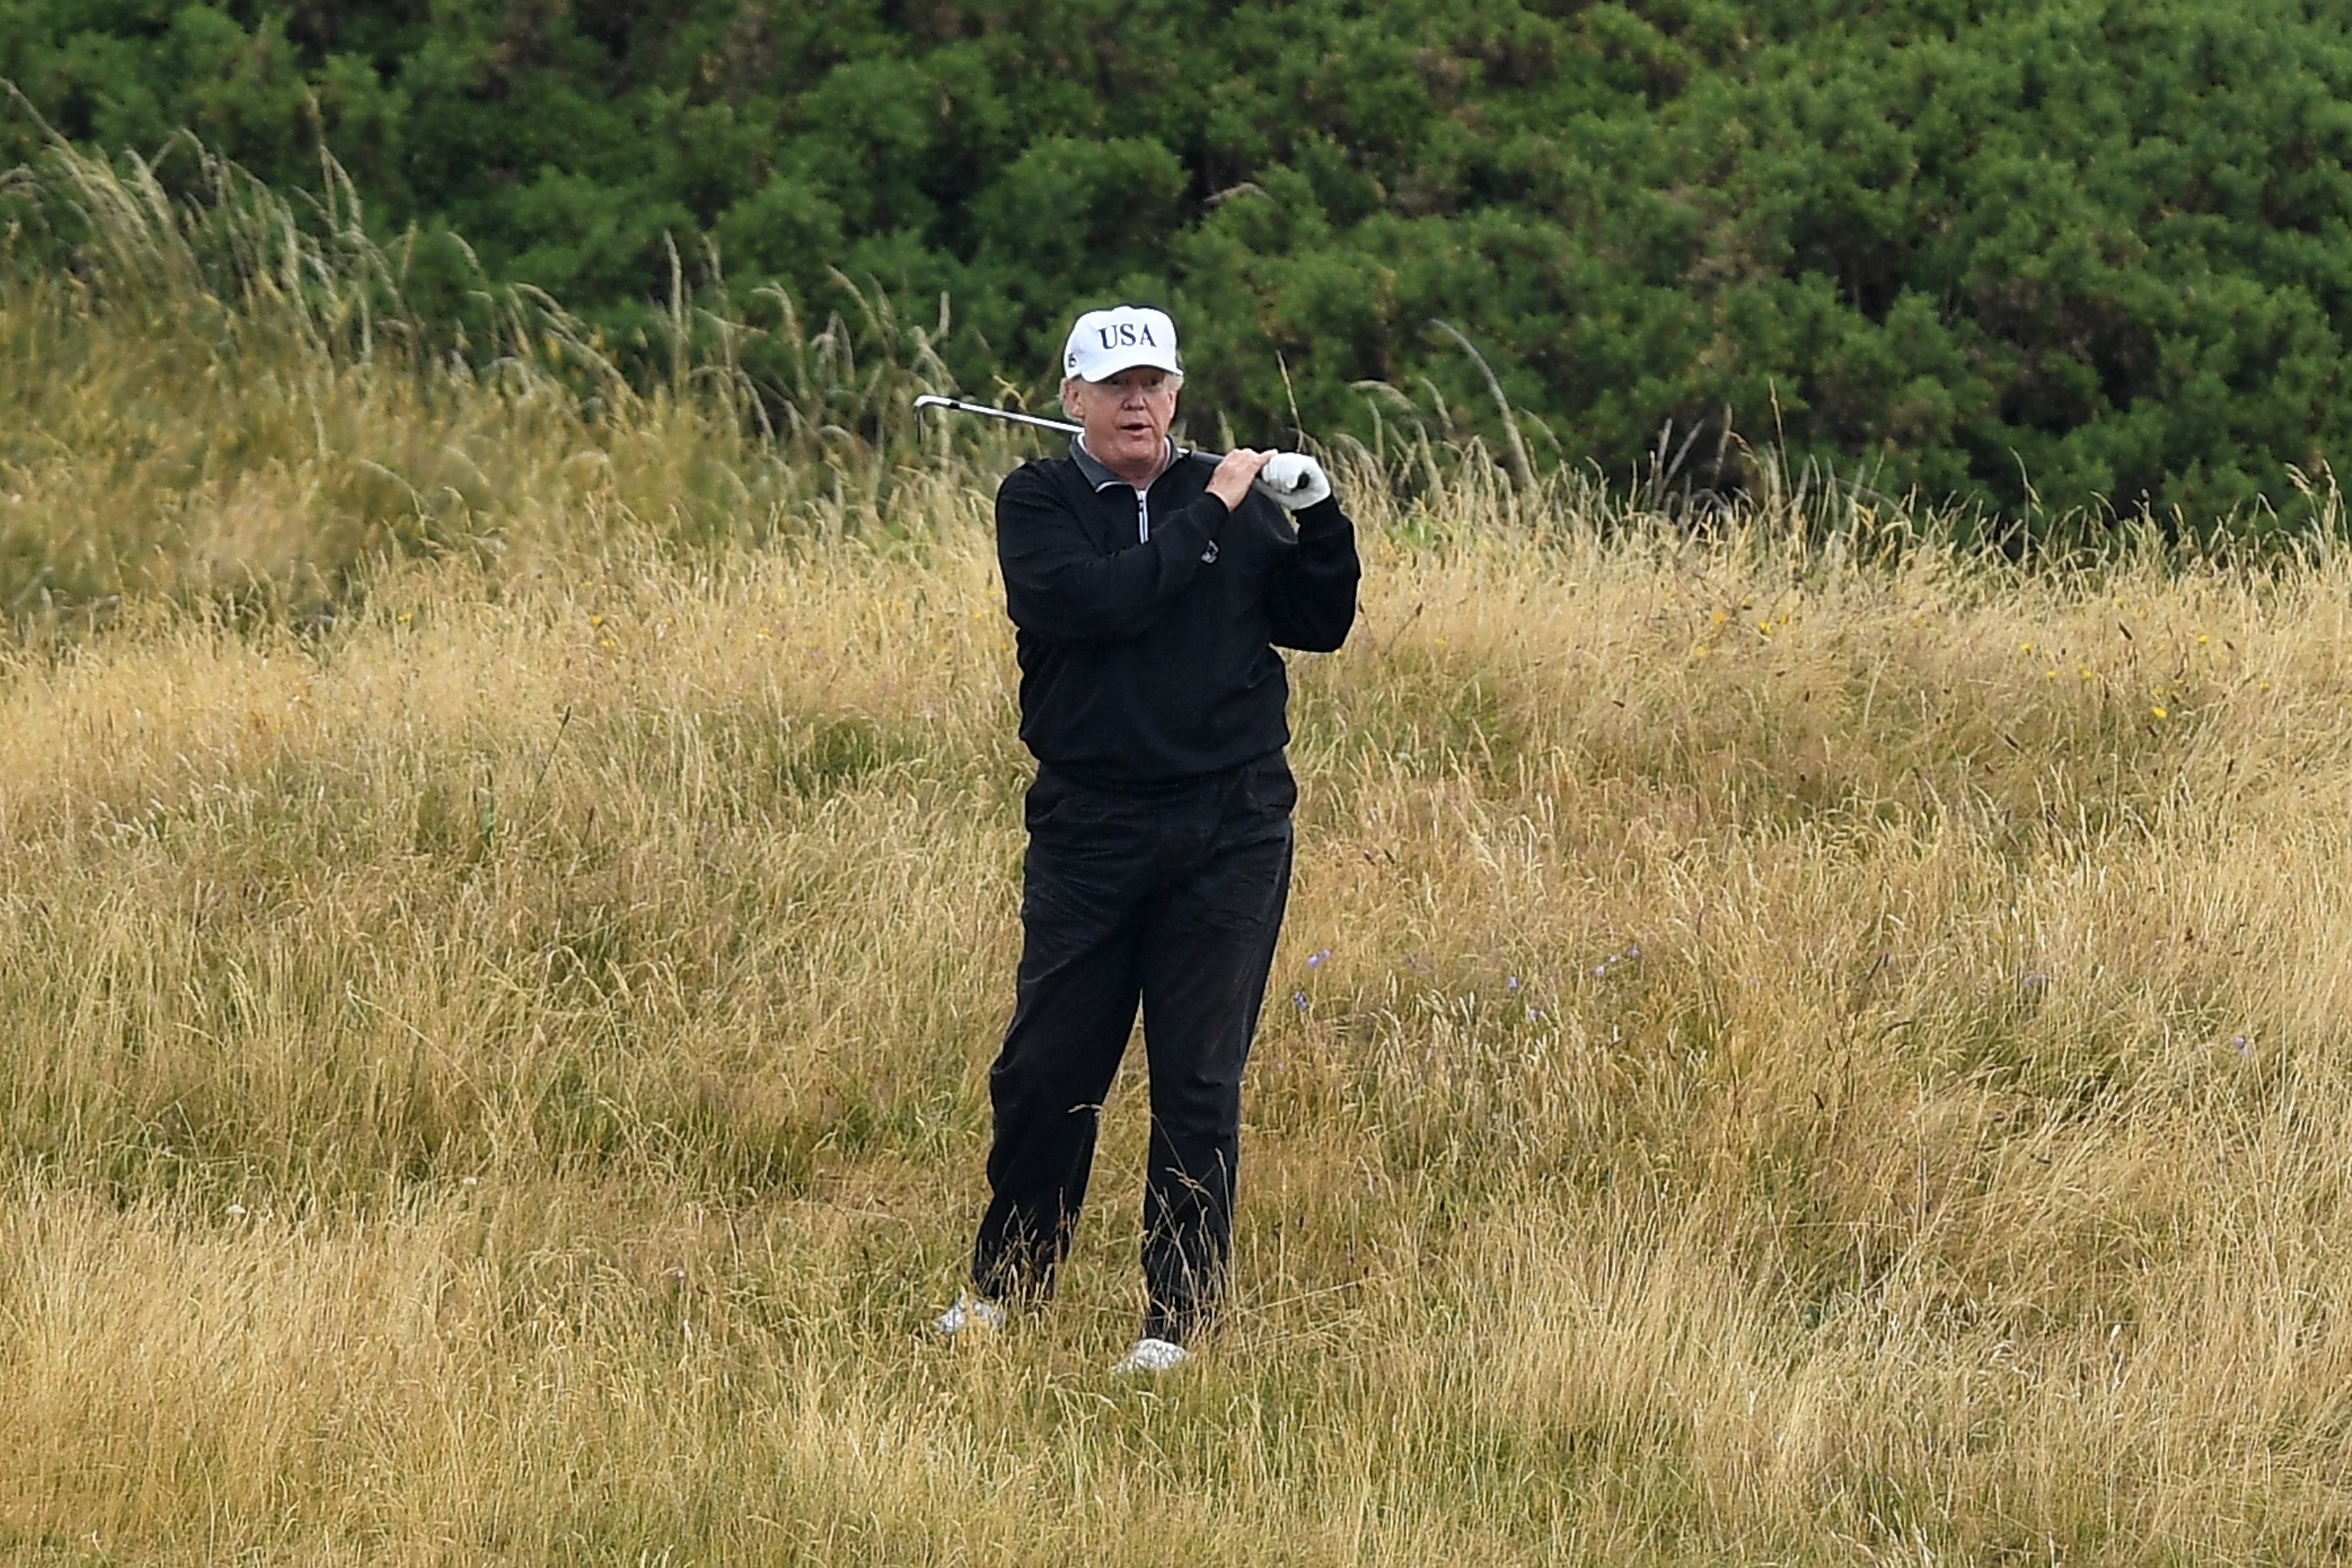 Donald Trump plays a round of golf at Trump Turnberry Luxury Collection Resort during the US President's first official visit to the United Kingdom on July 15, 2018 in Turnberry, Scotland.